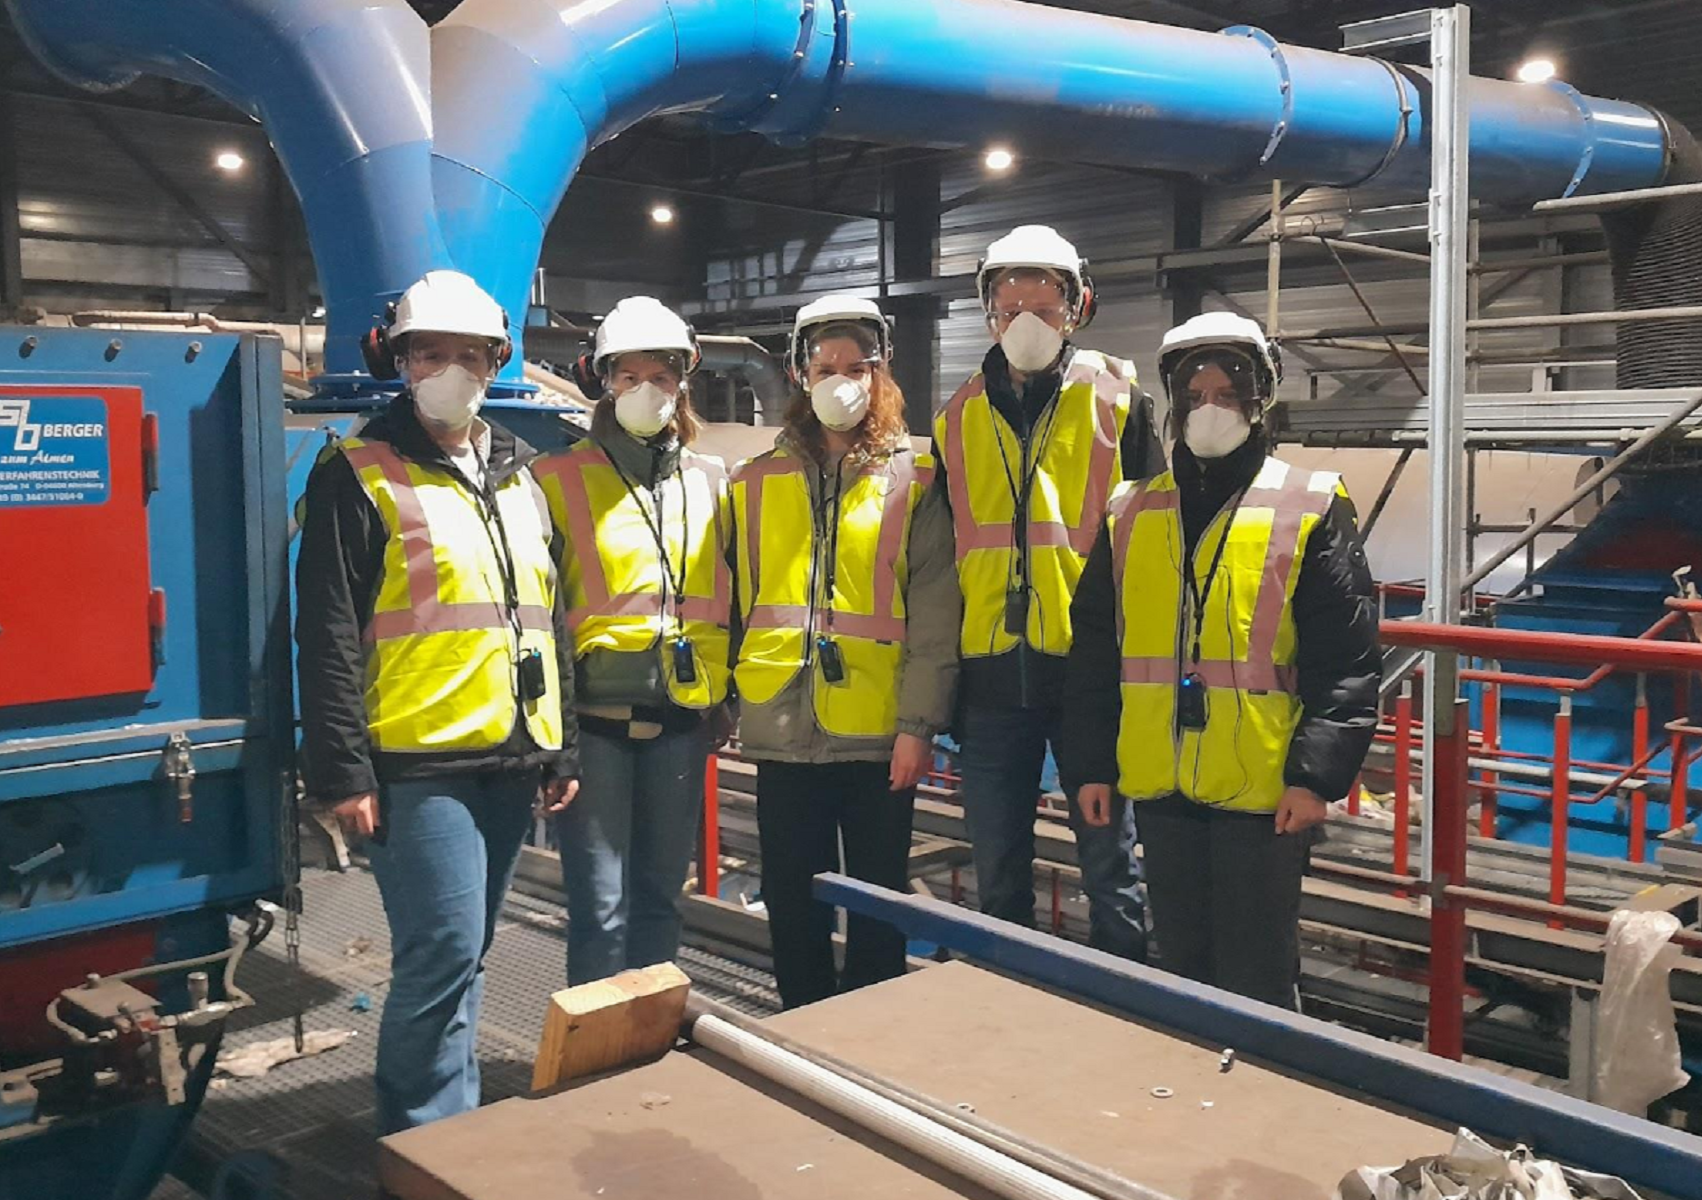 As part of the project, the students also had the opportunity to visit the waste management facility Omrin to gain more insights for their research.